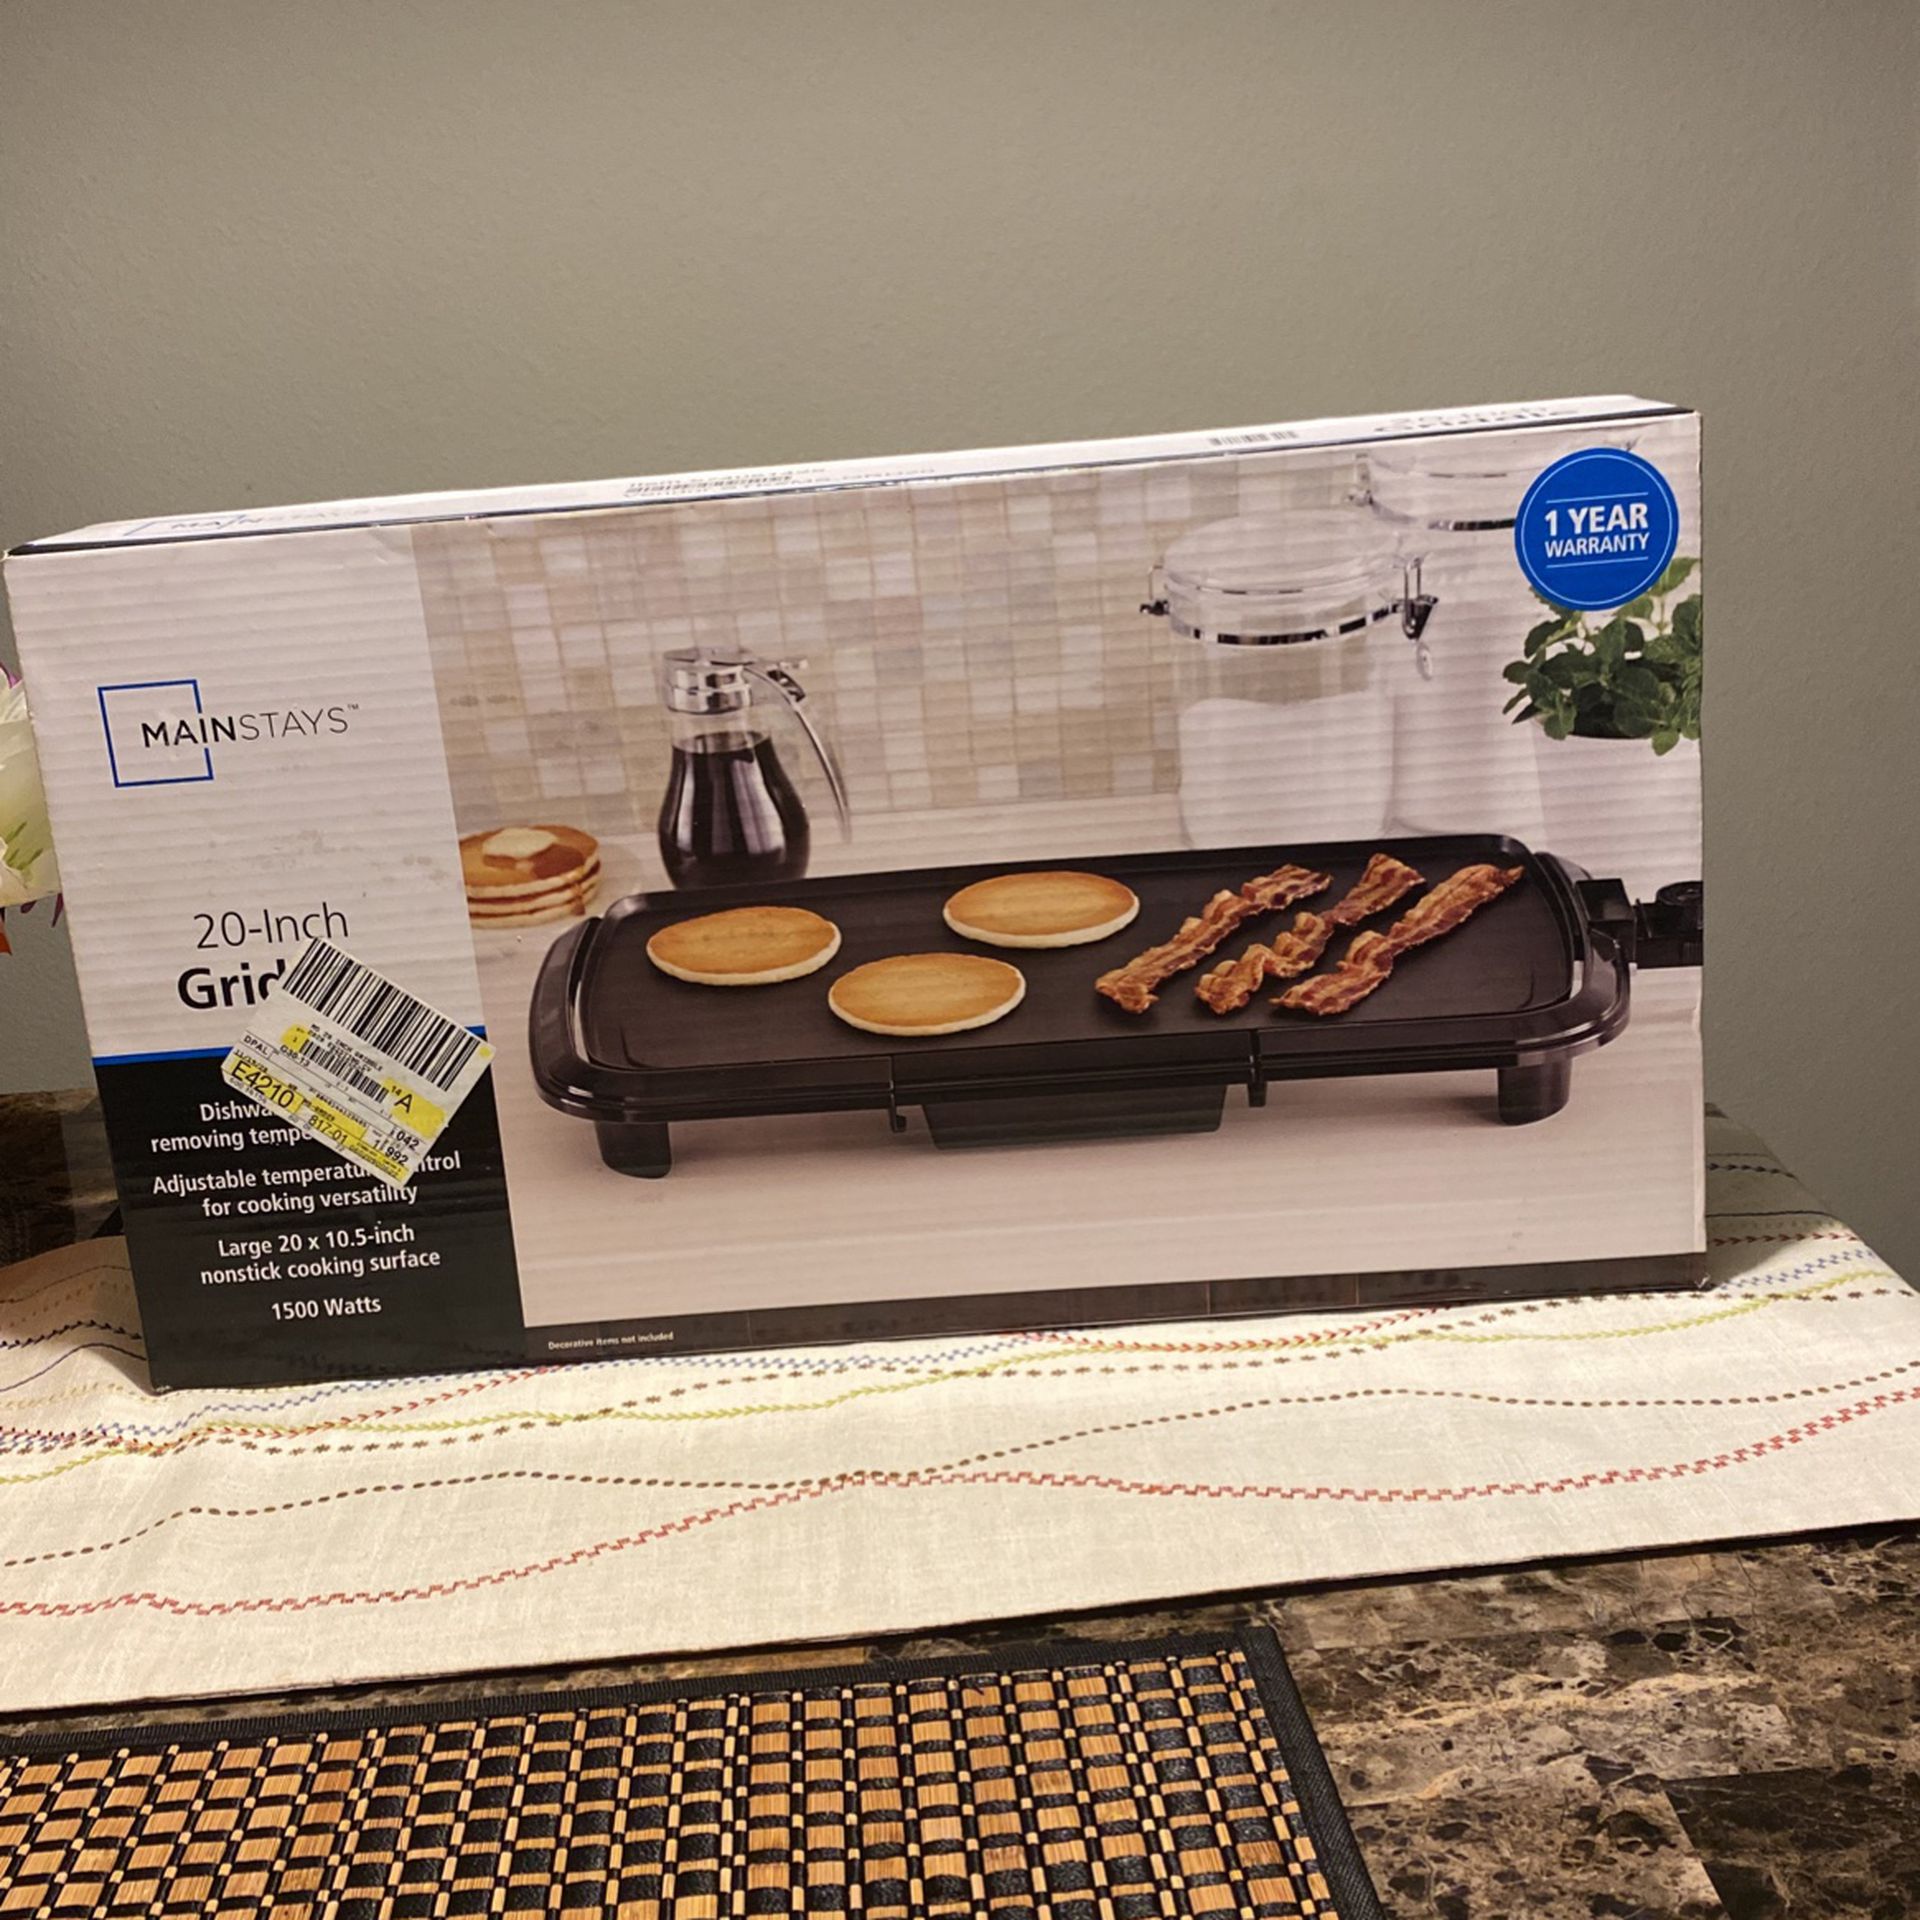 20-inch Griddle Electric